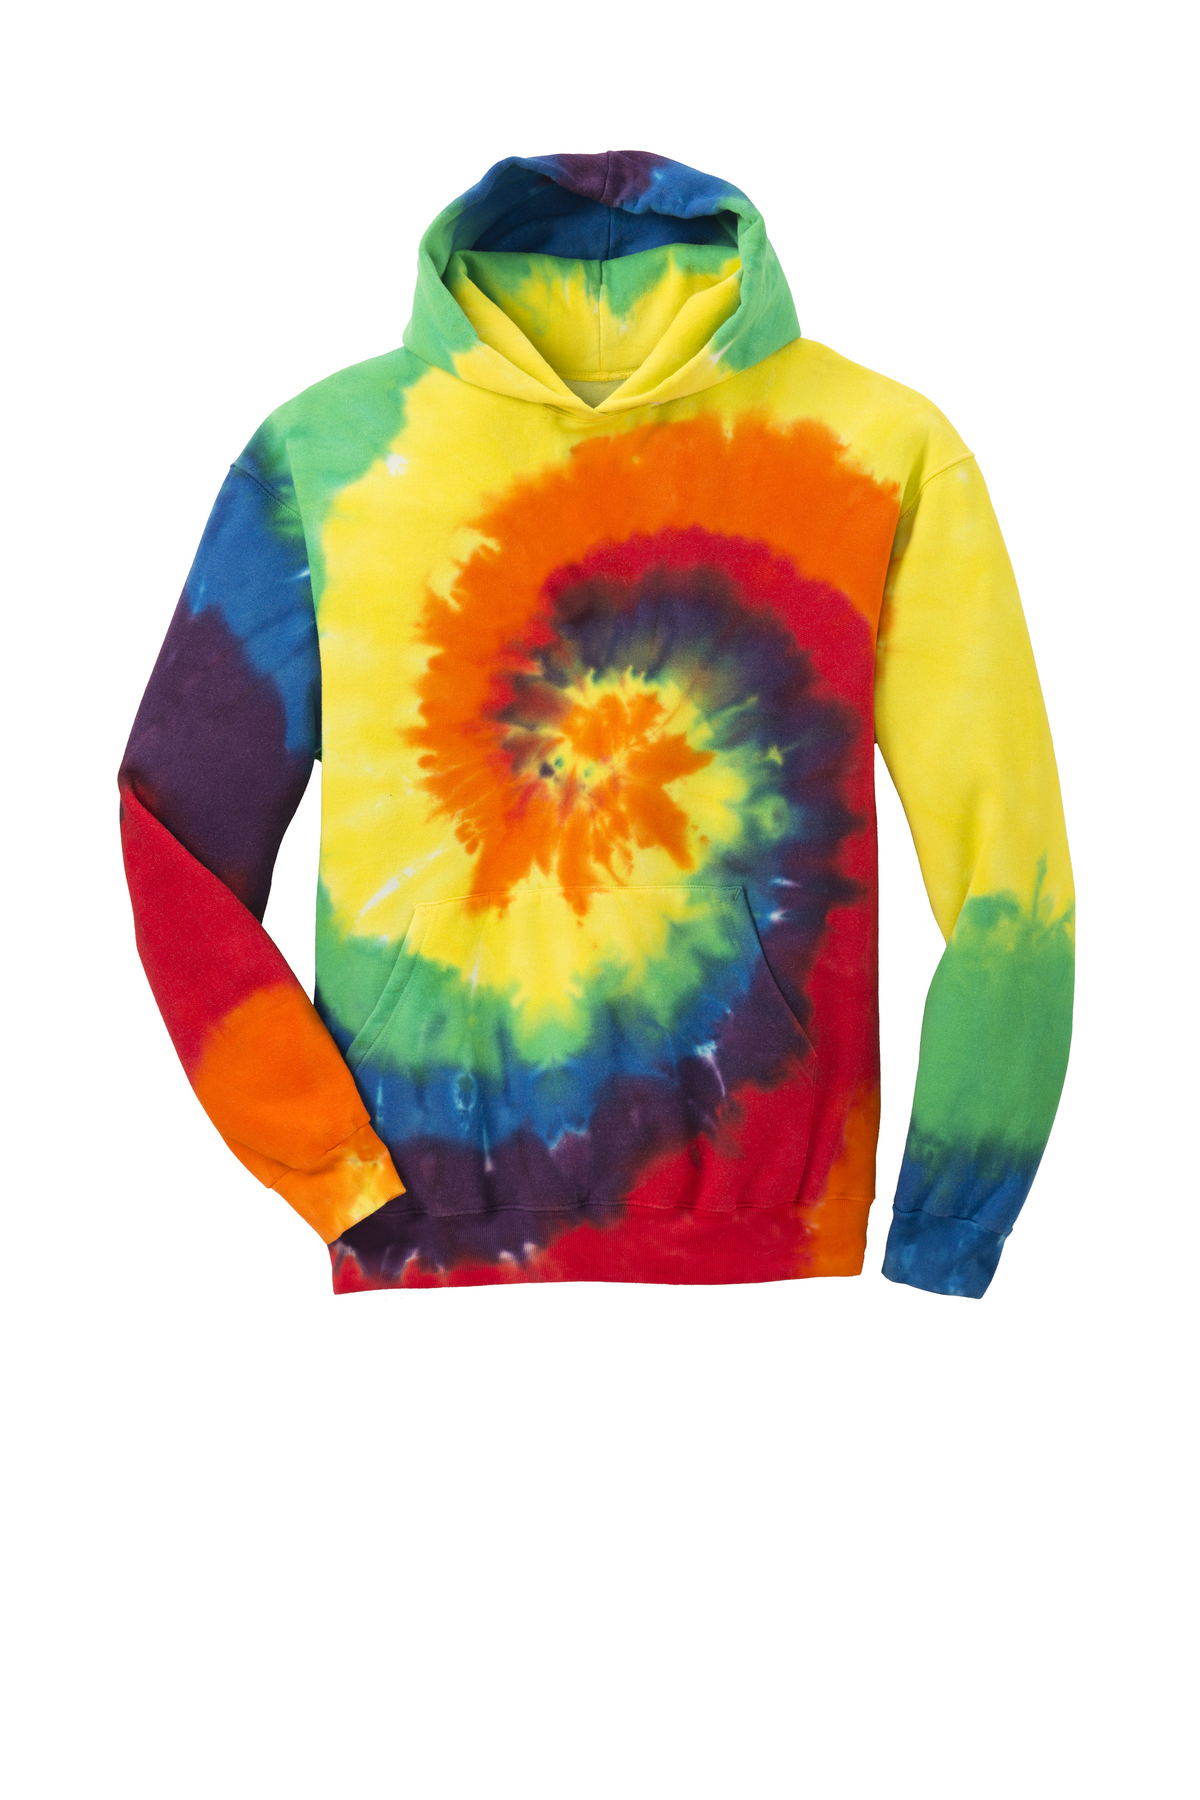 Independent Trading Co. PRM1500TD Youth Midweight Tie Dye Hooded Pullover - Tie Dye Black, M